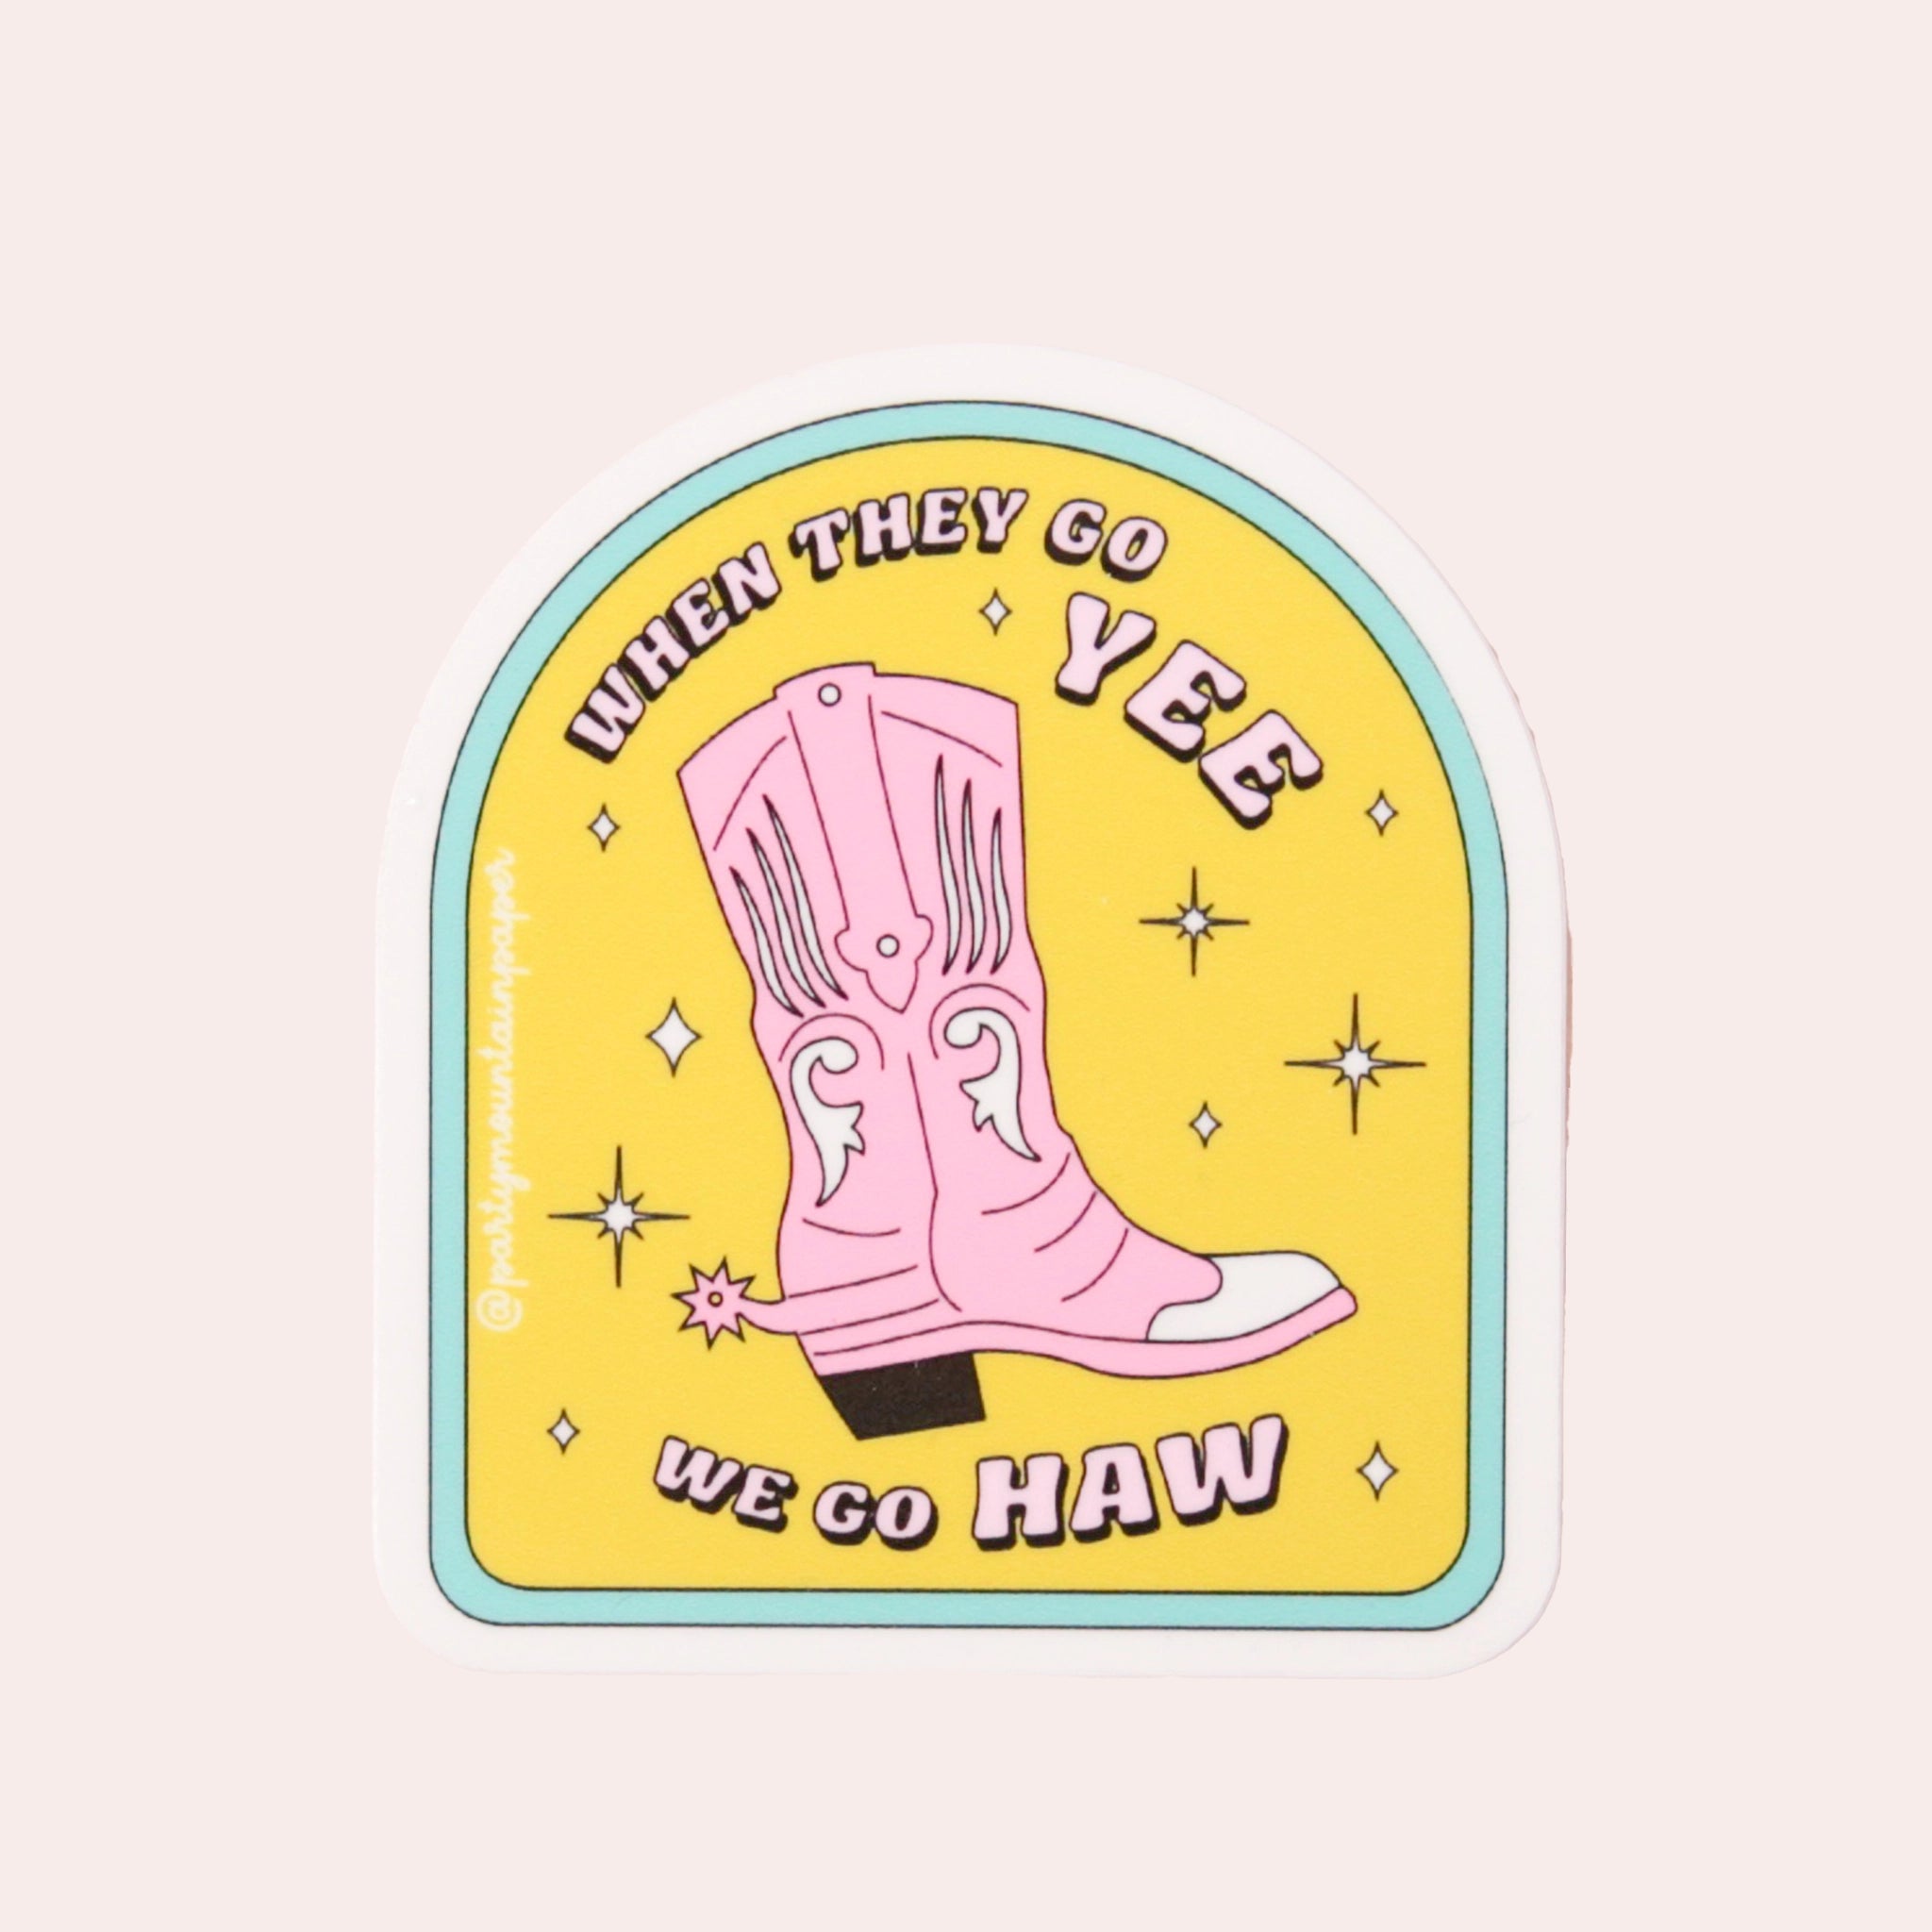 A yellow arched sticker with a light blue rim and a pink cowgirl boot in the center along with pink text that reads, "When They Go Yee We Go Haw".